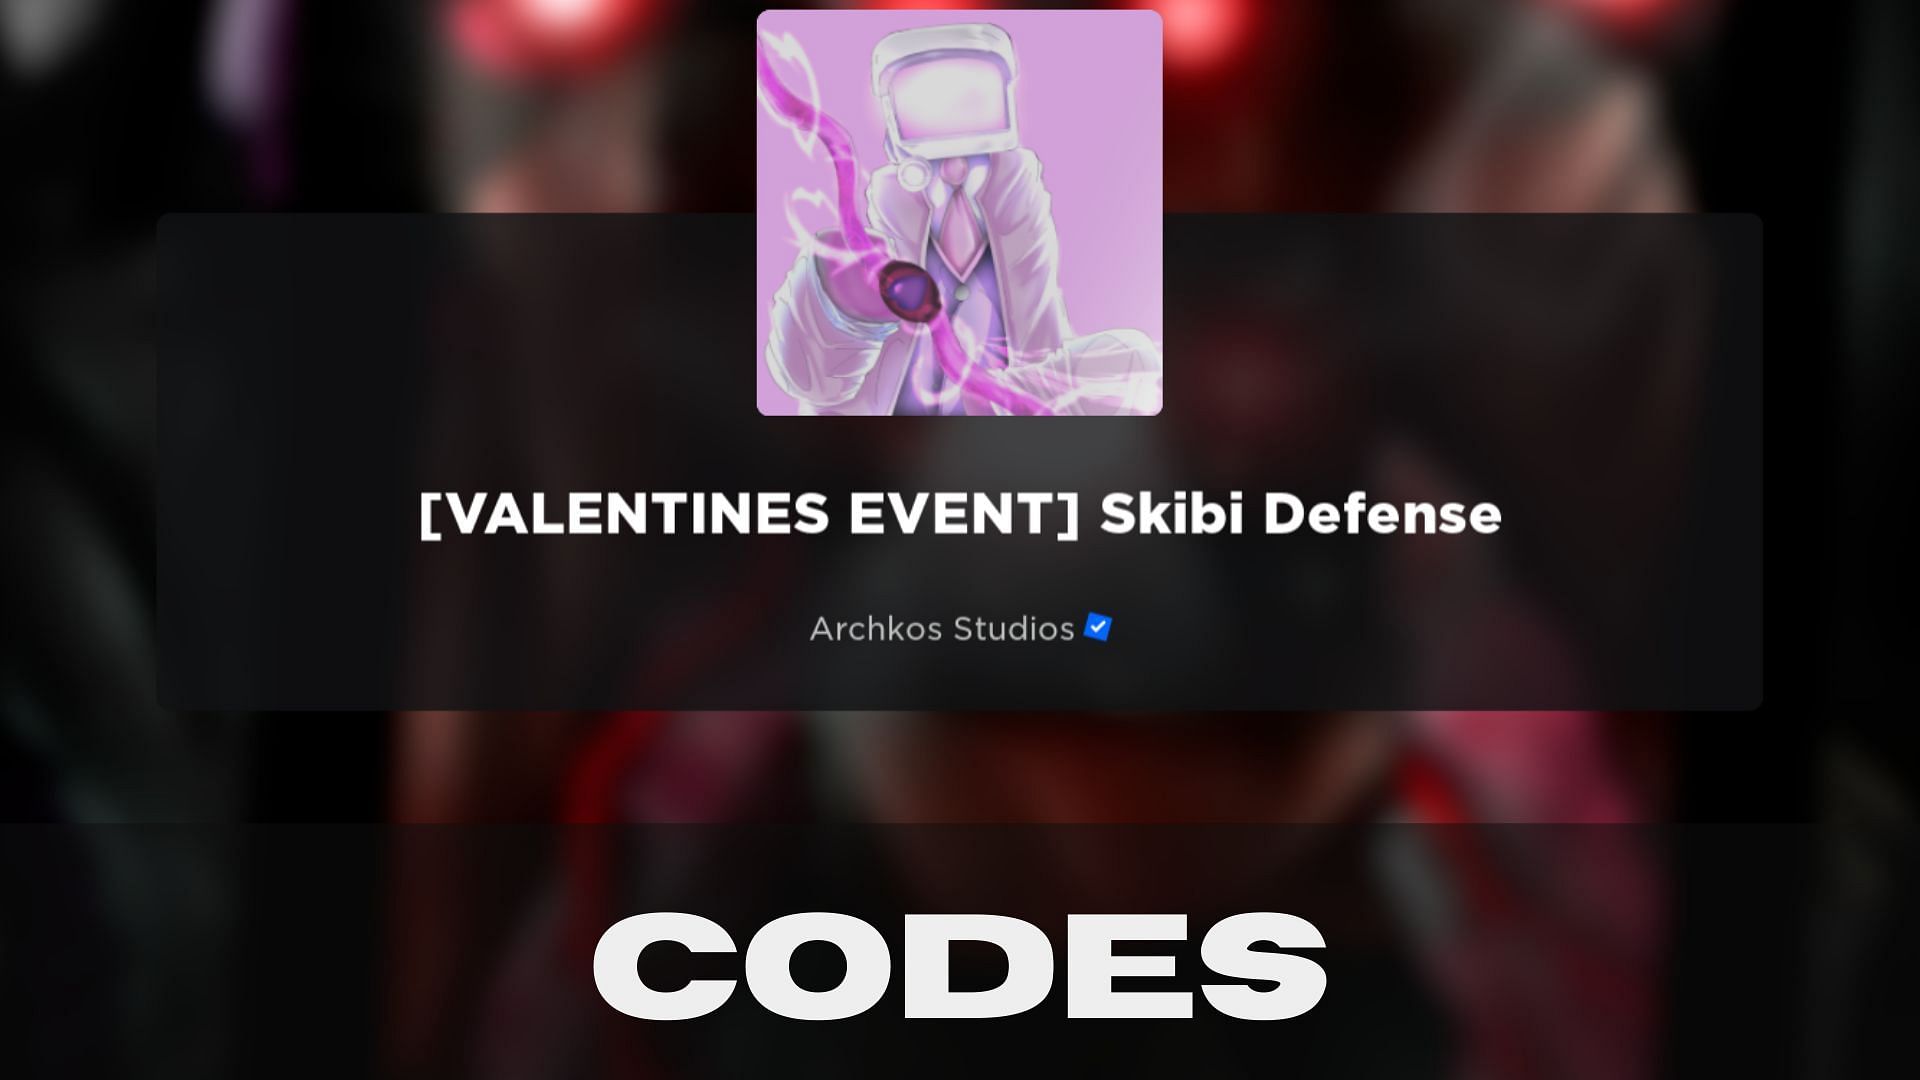 Use the Skibi Defense codes to earn free Credits